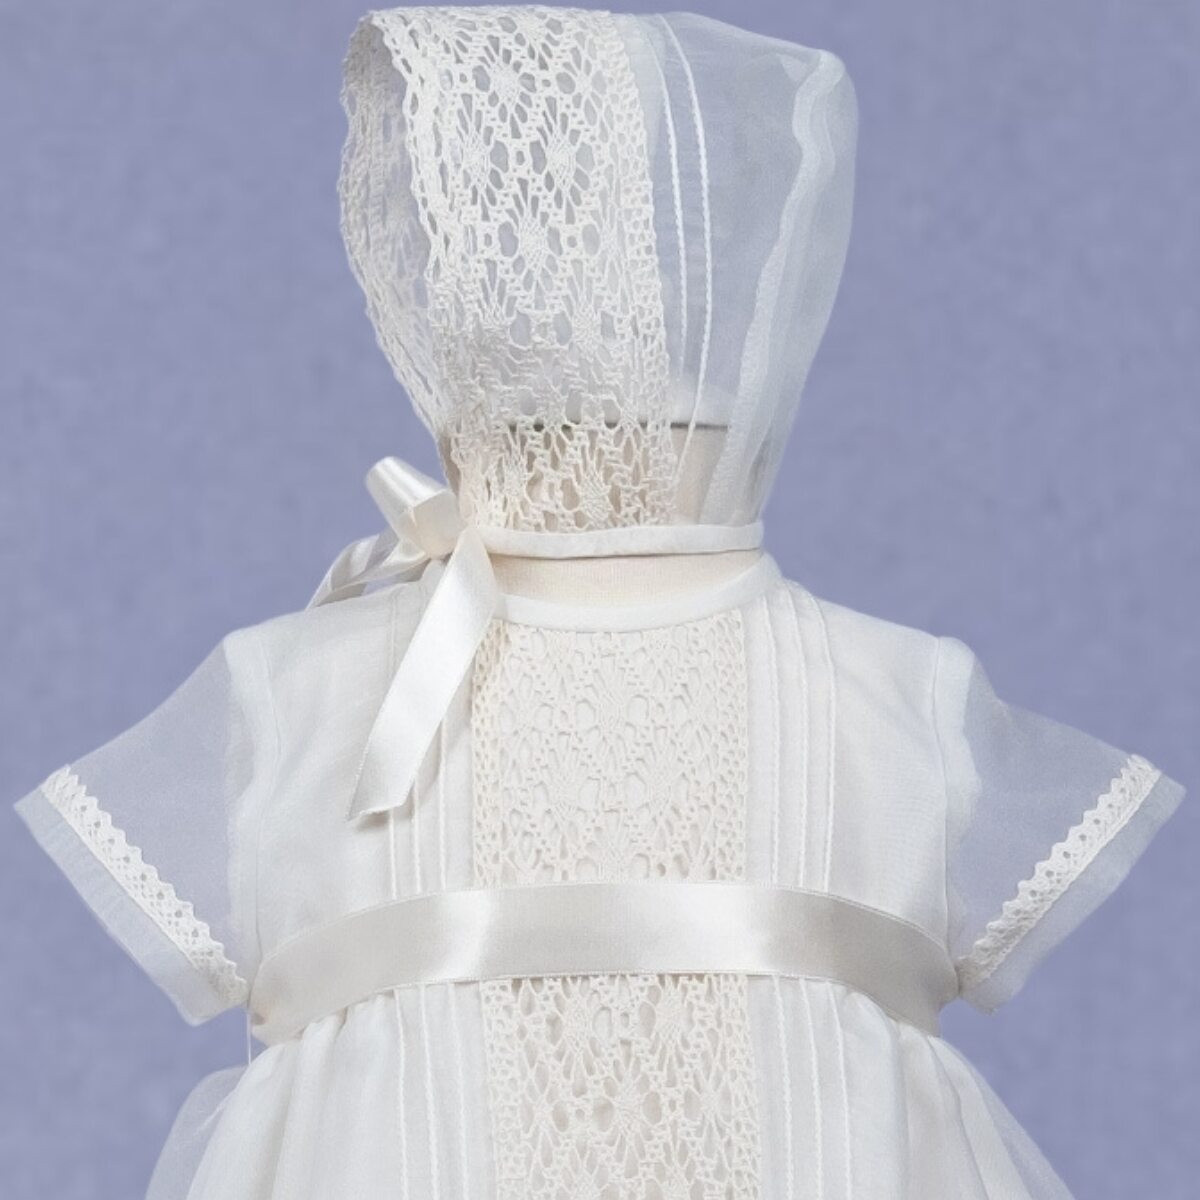 GIRLS CERMONIAL DRESS WITH LACE MISHA BABY - 4